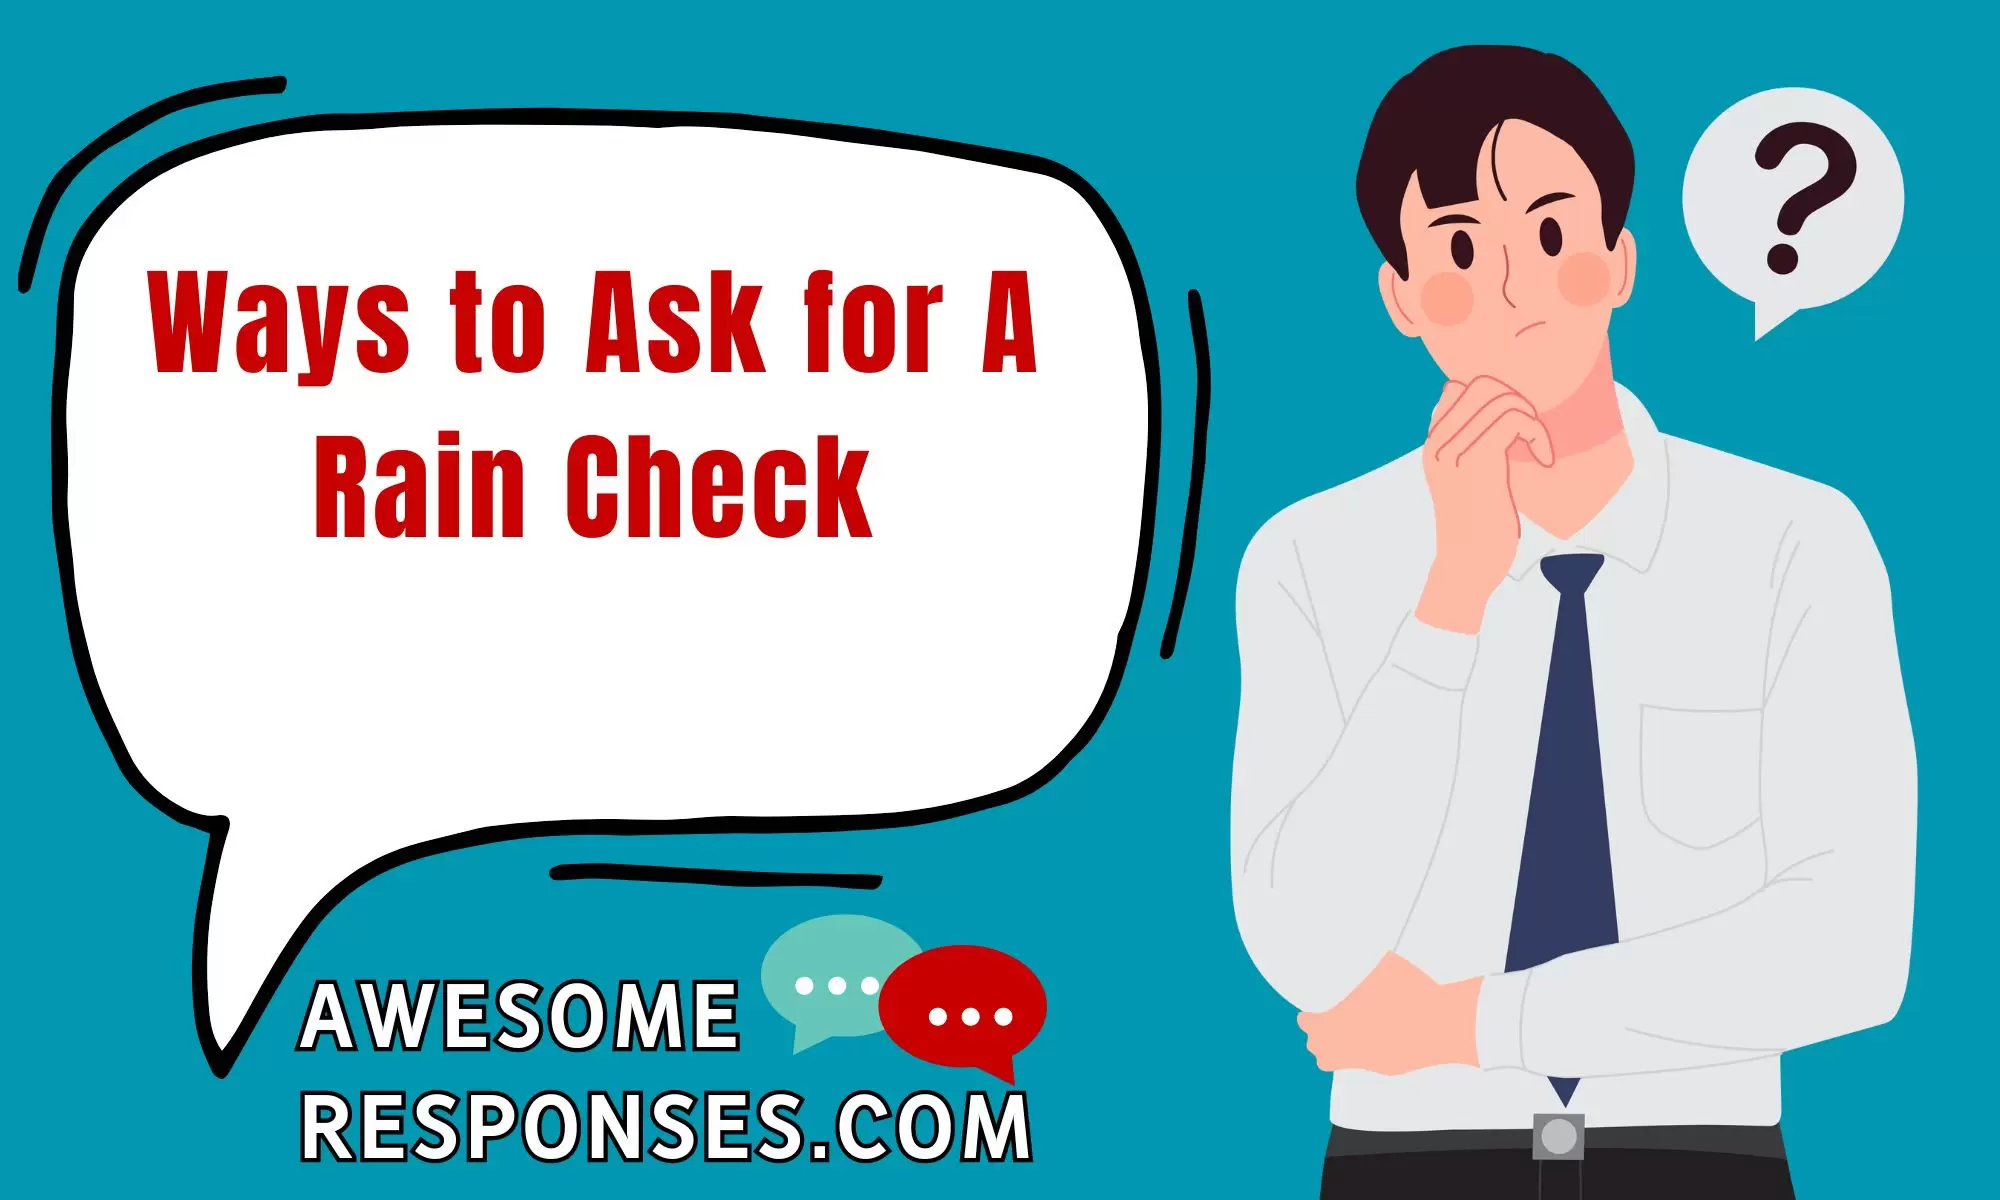 Ways to Ask for A Rain Check